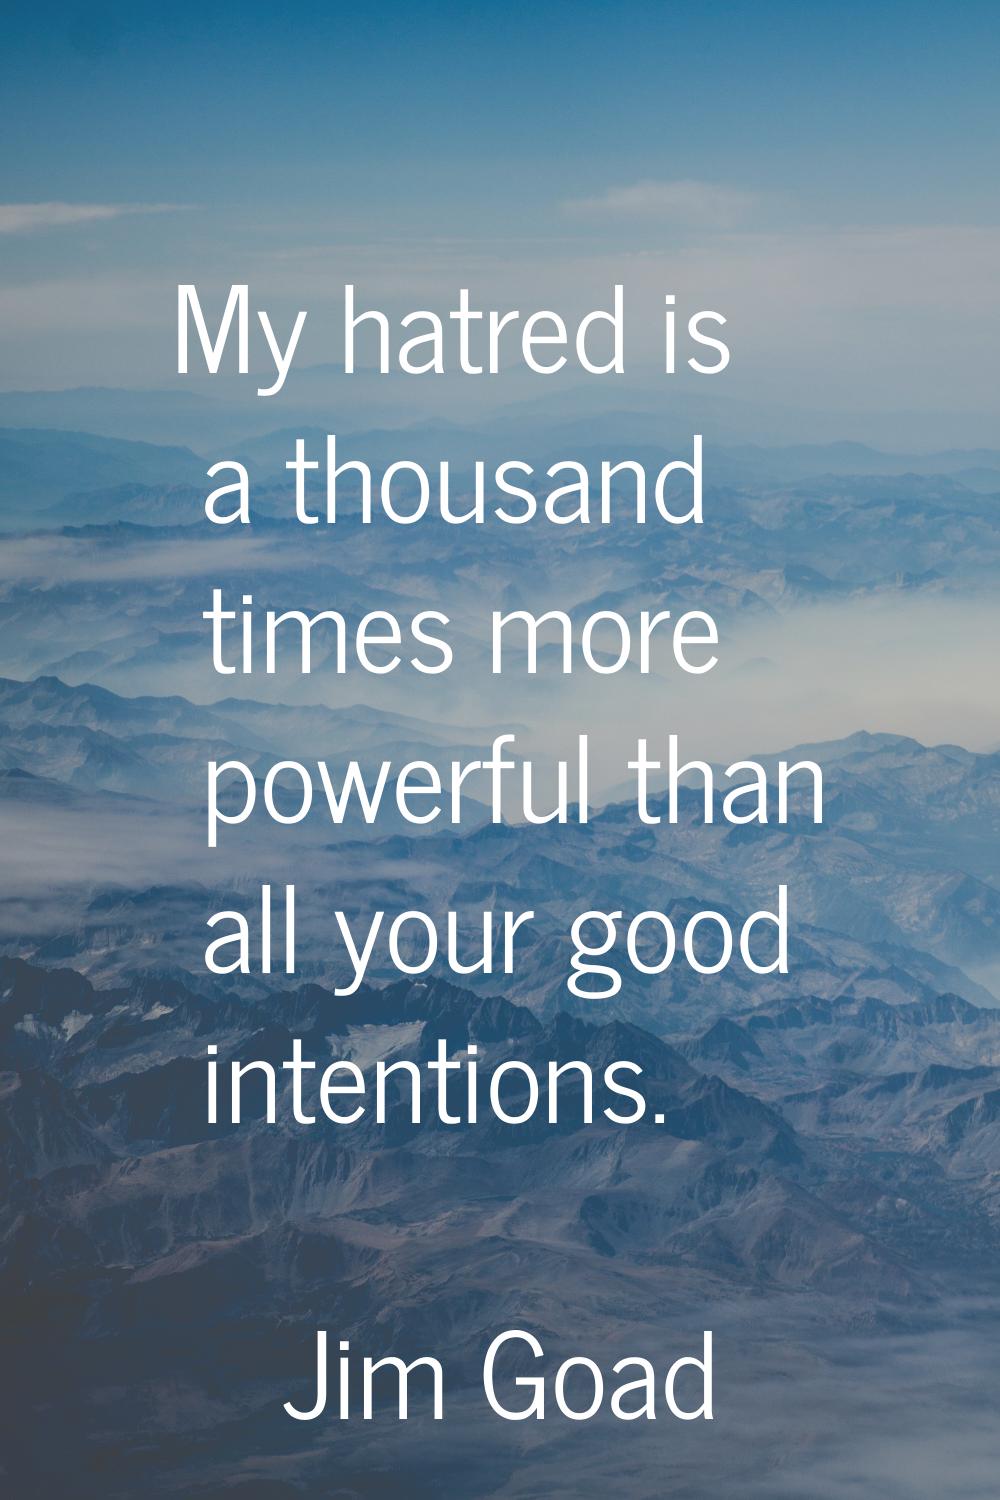 My hatred is a thousand times more powerful than all your good intentions.